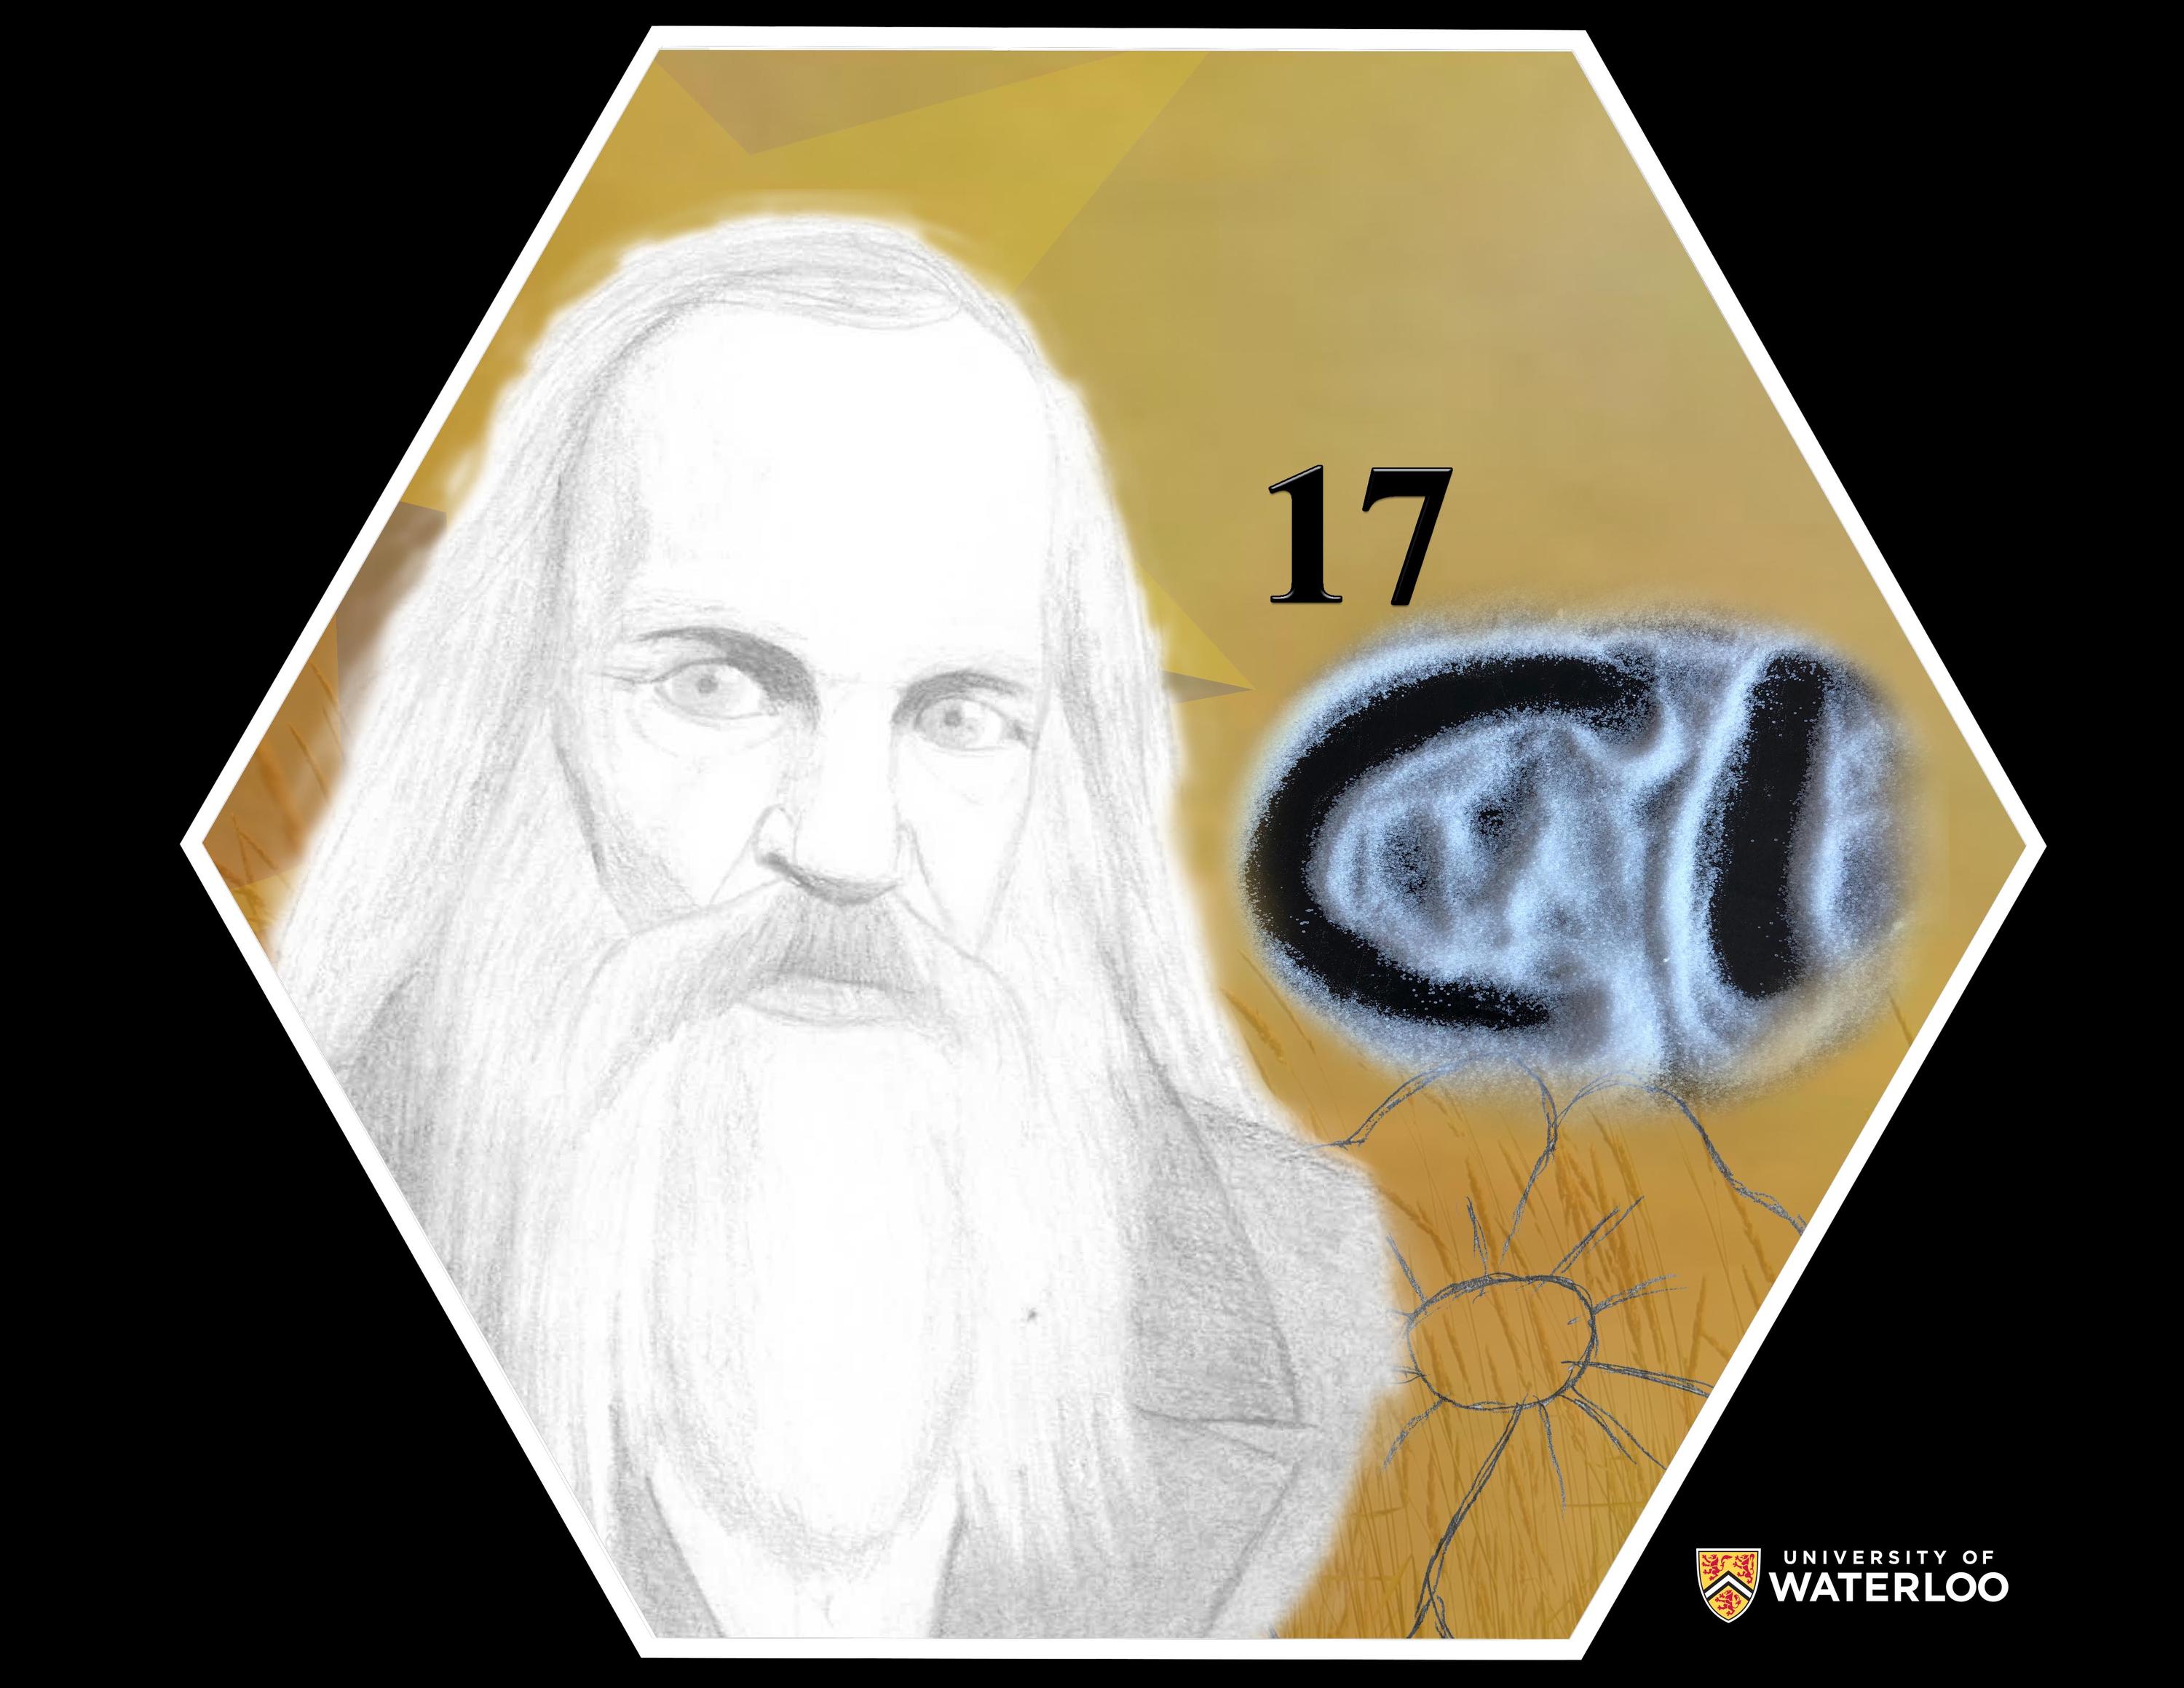 Digital composite on yellow background. Featured centre left is a pencil portrait of Mendeleev on white paper with a faint star behind him. Photo image of chemical symbol “Cl” written out in salt left; atomic number “17” above. Hand-drawn of a poppy in pencil below